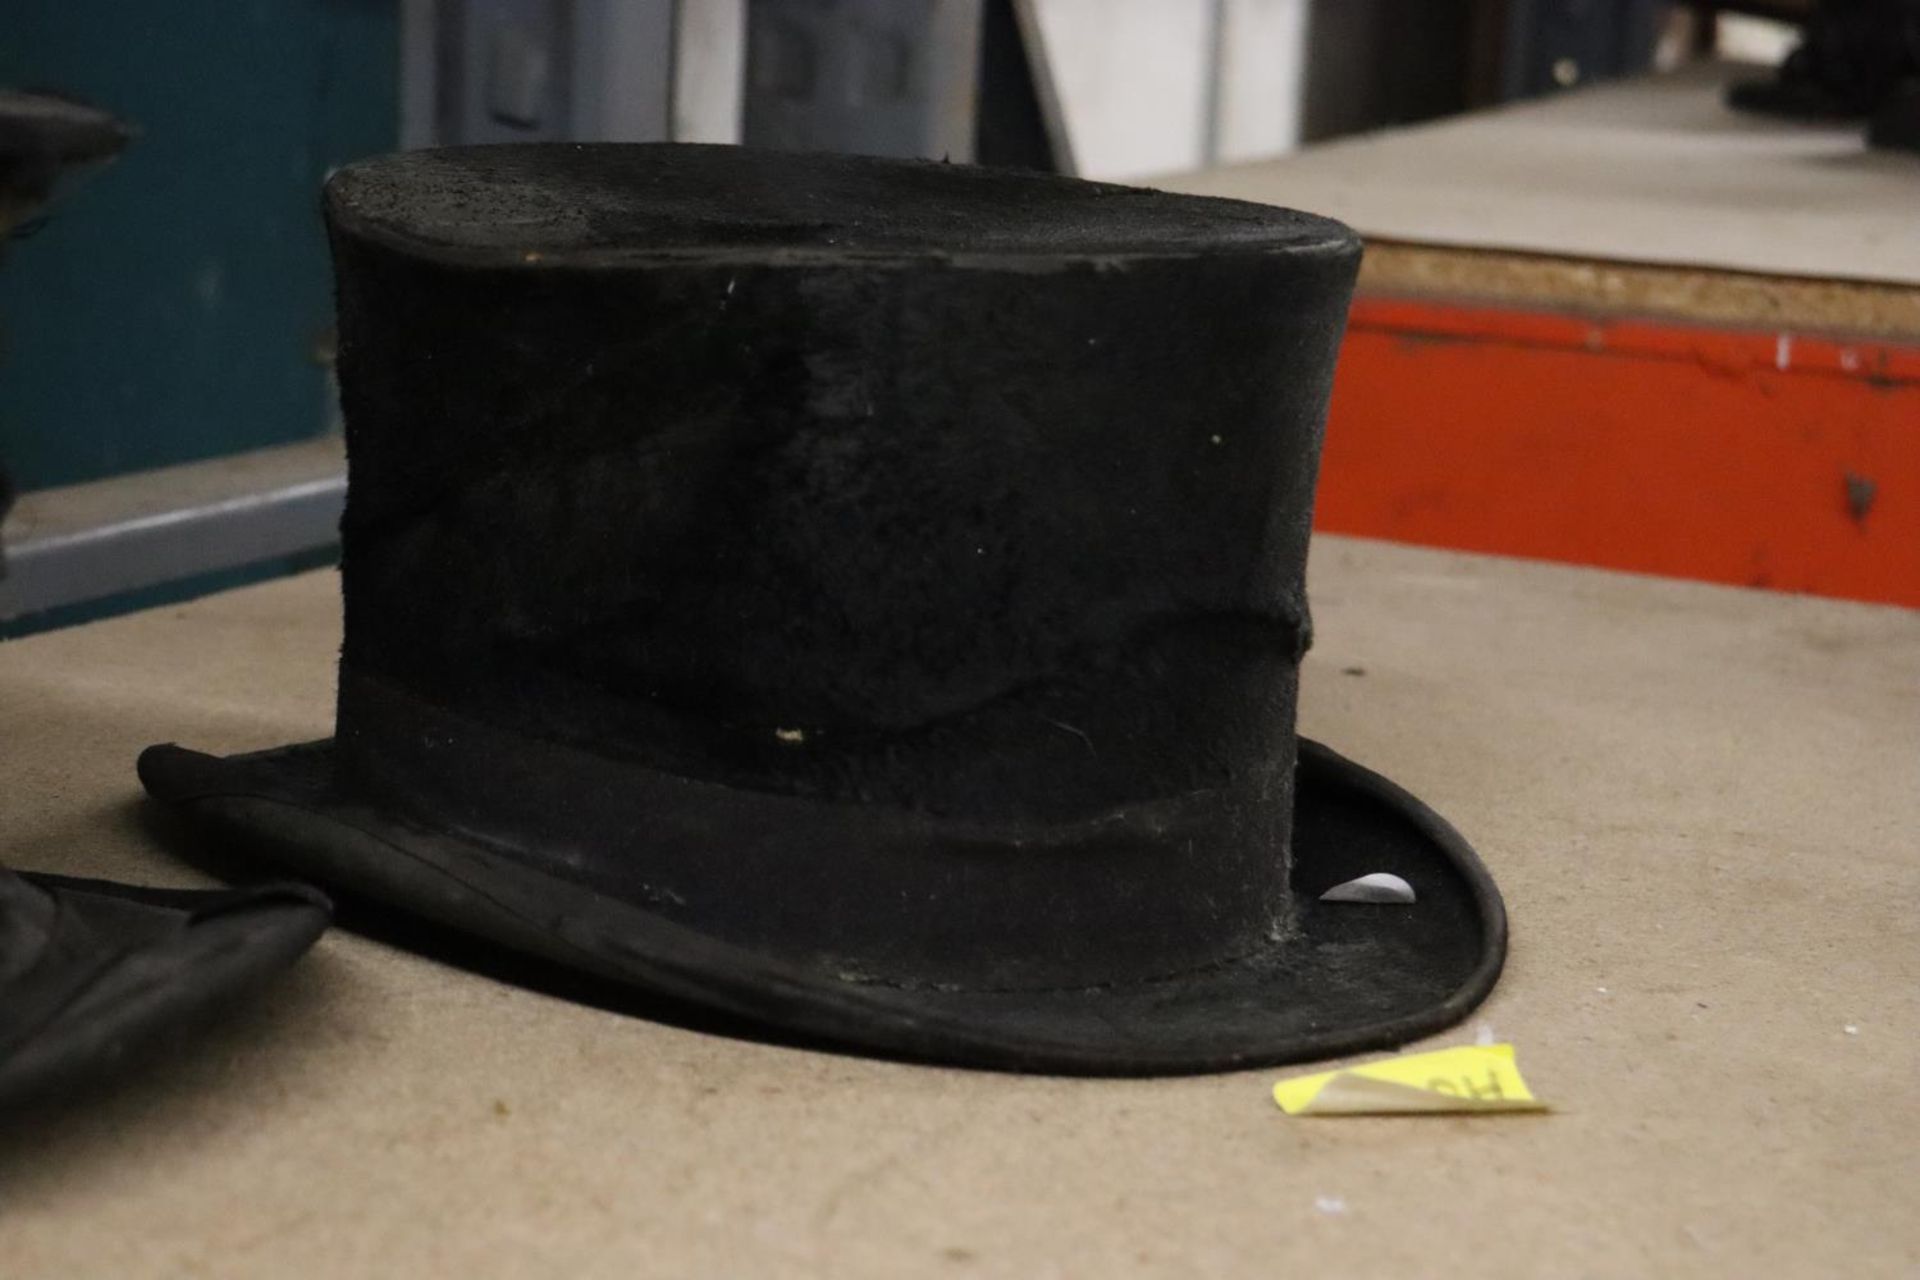 TWO VINTAGE TOP HATS AND A BOWLER HAT - TOP HATS A/F - Image 4 of 6